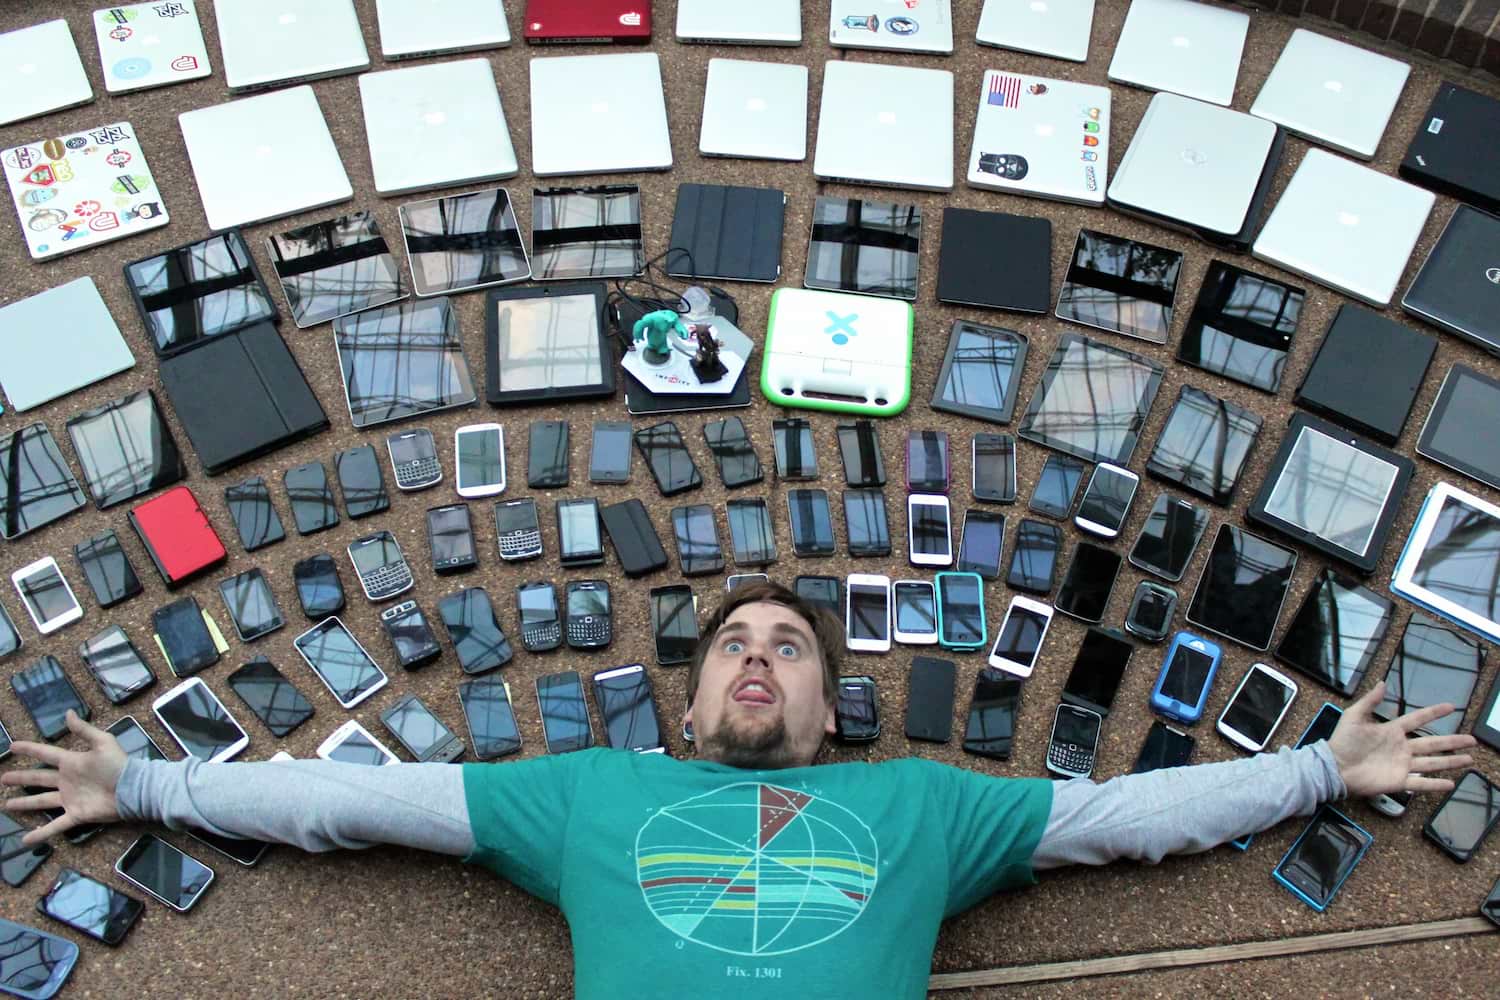 A man lies on the floor, arms stretched, as if he's been knocked out. Above him, arranged in concentric semi-circles are many different kinds of phones and tablets.